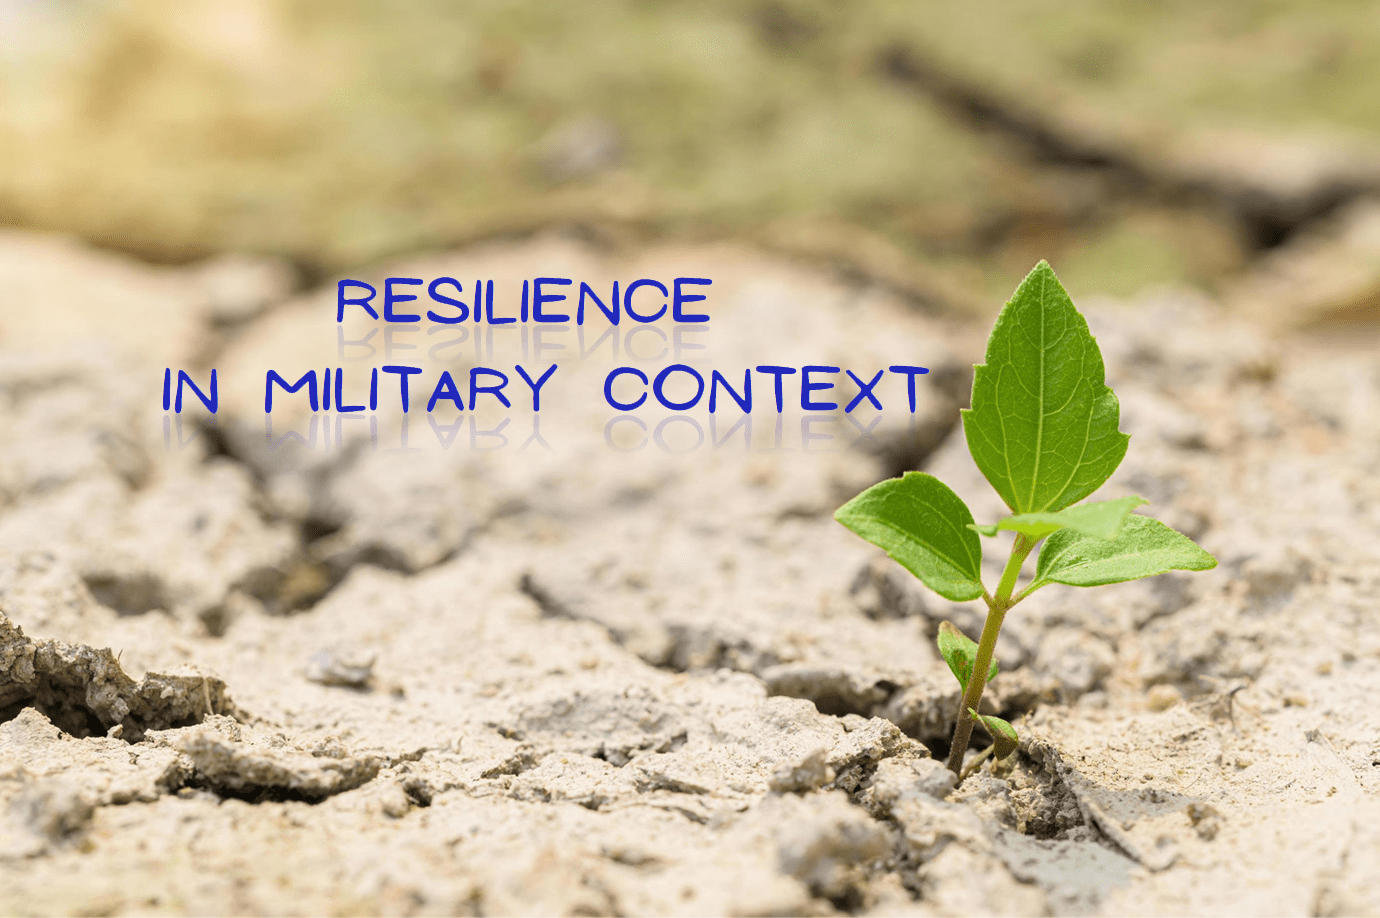 Army resilience